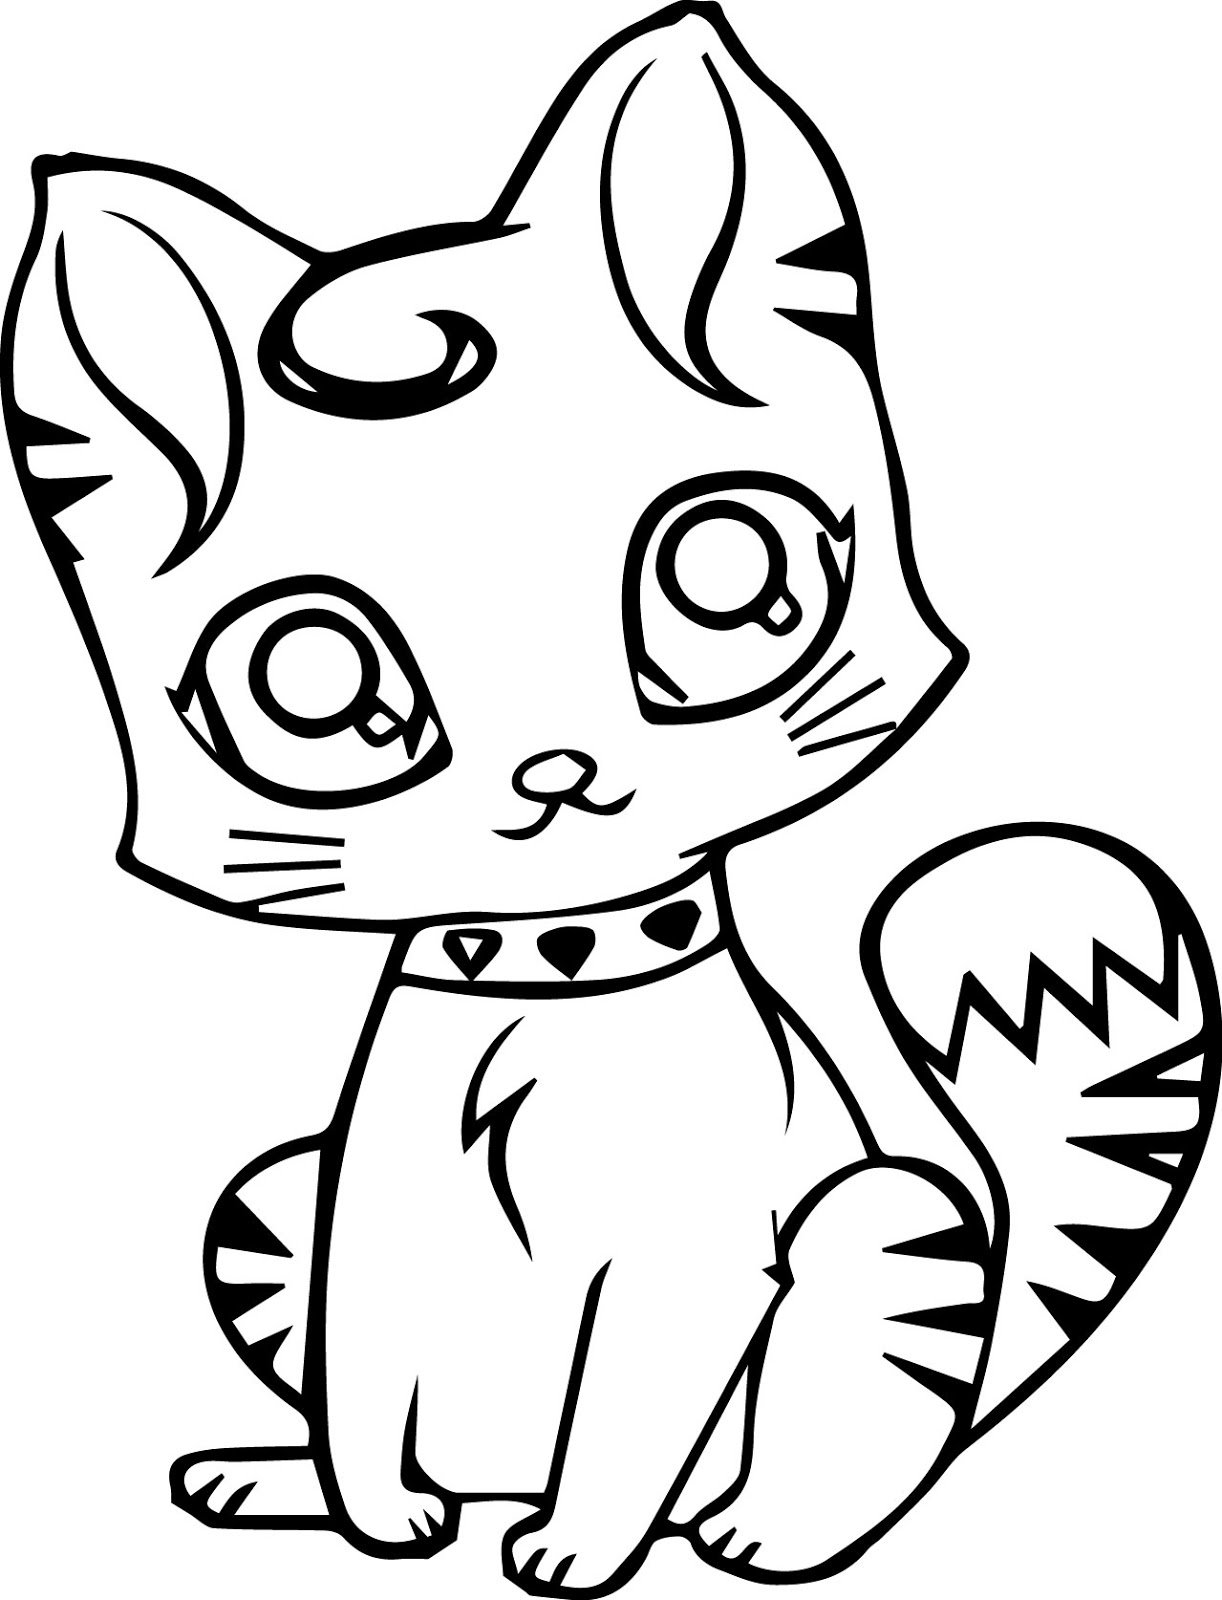 Kitten Coloring Page 2